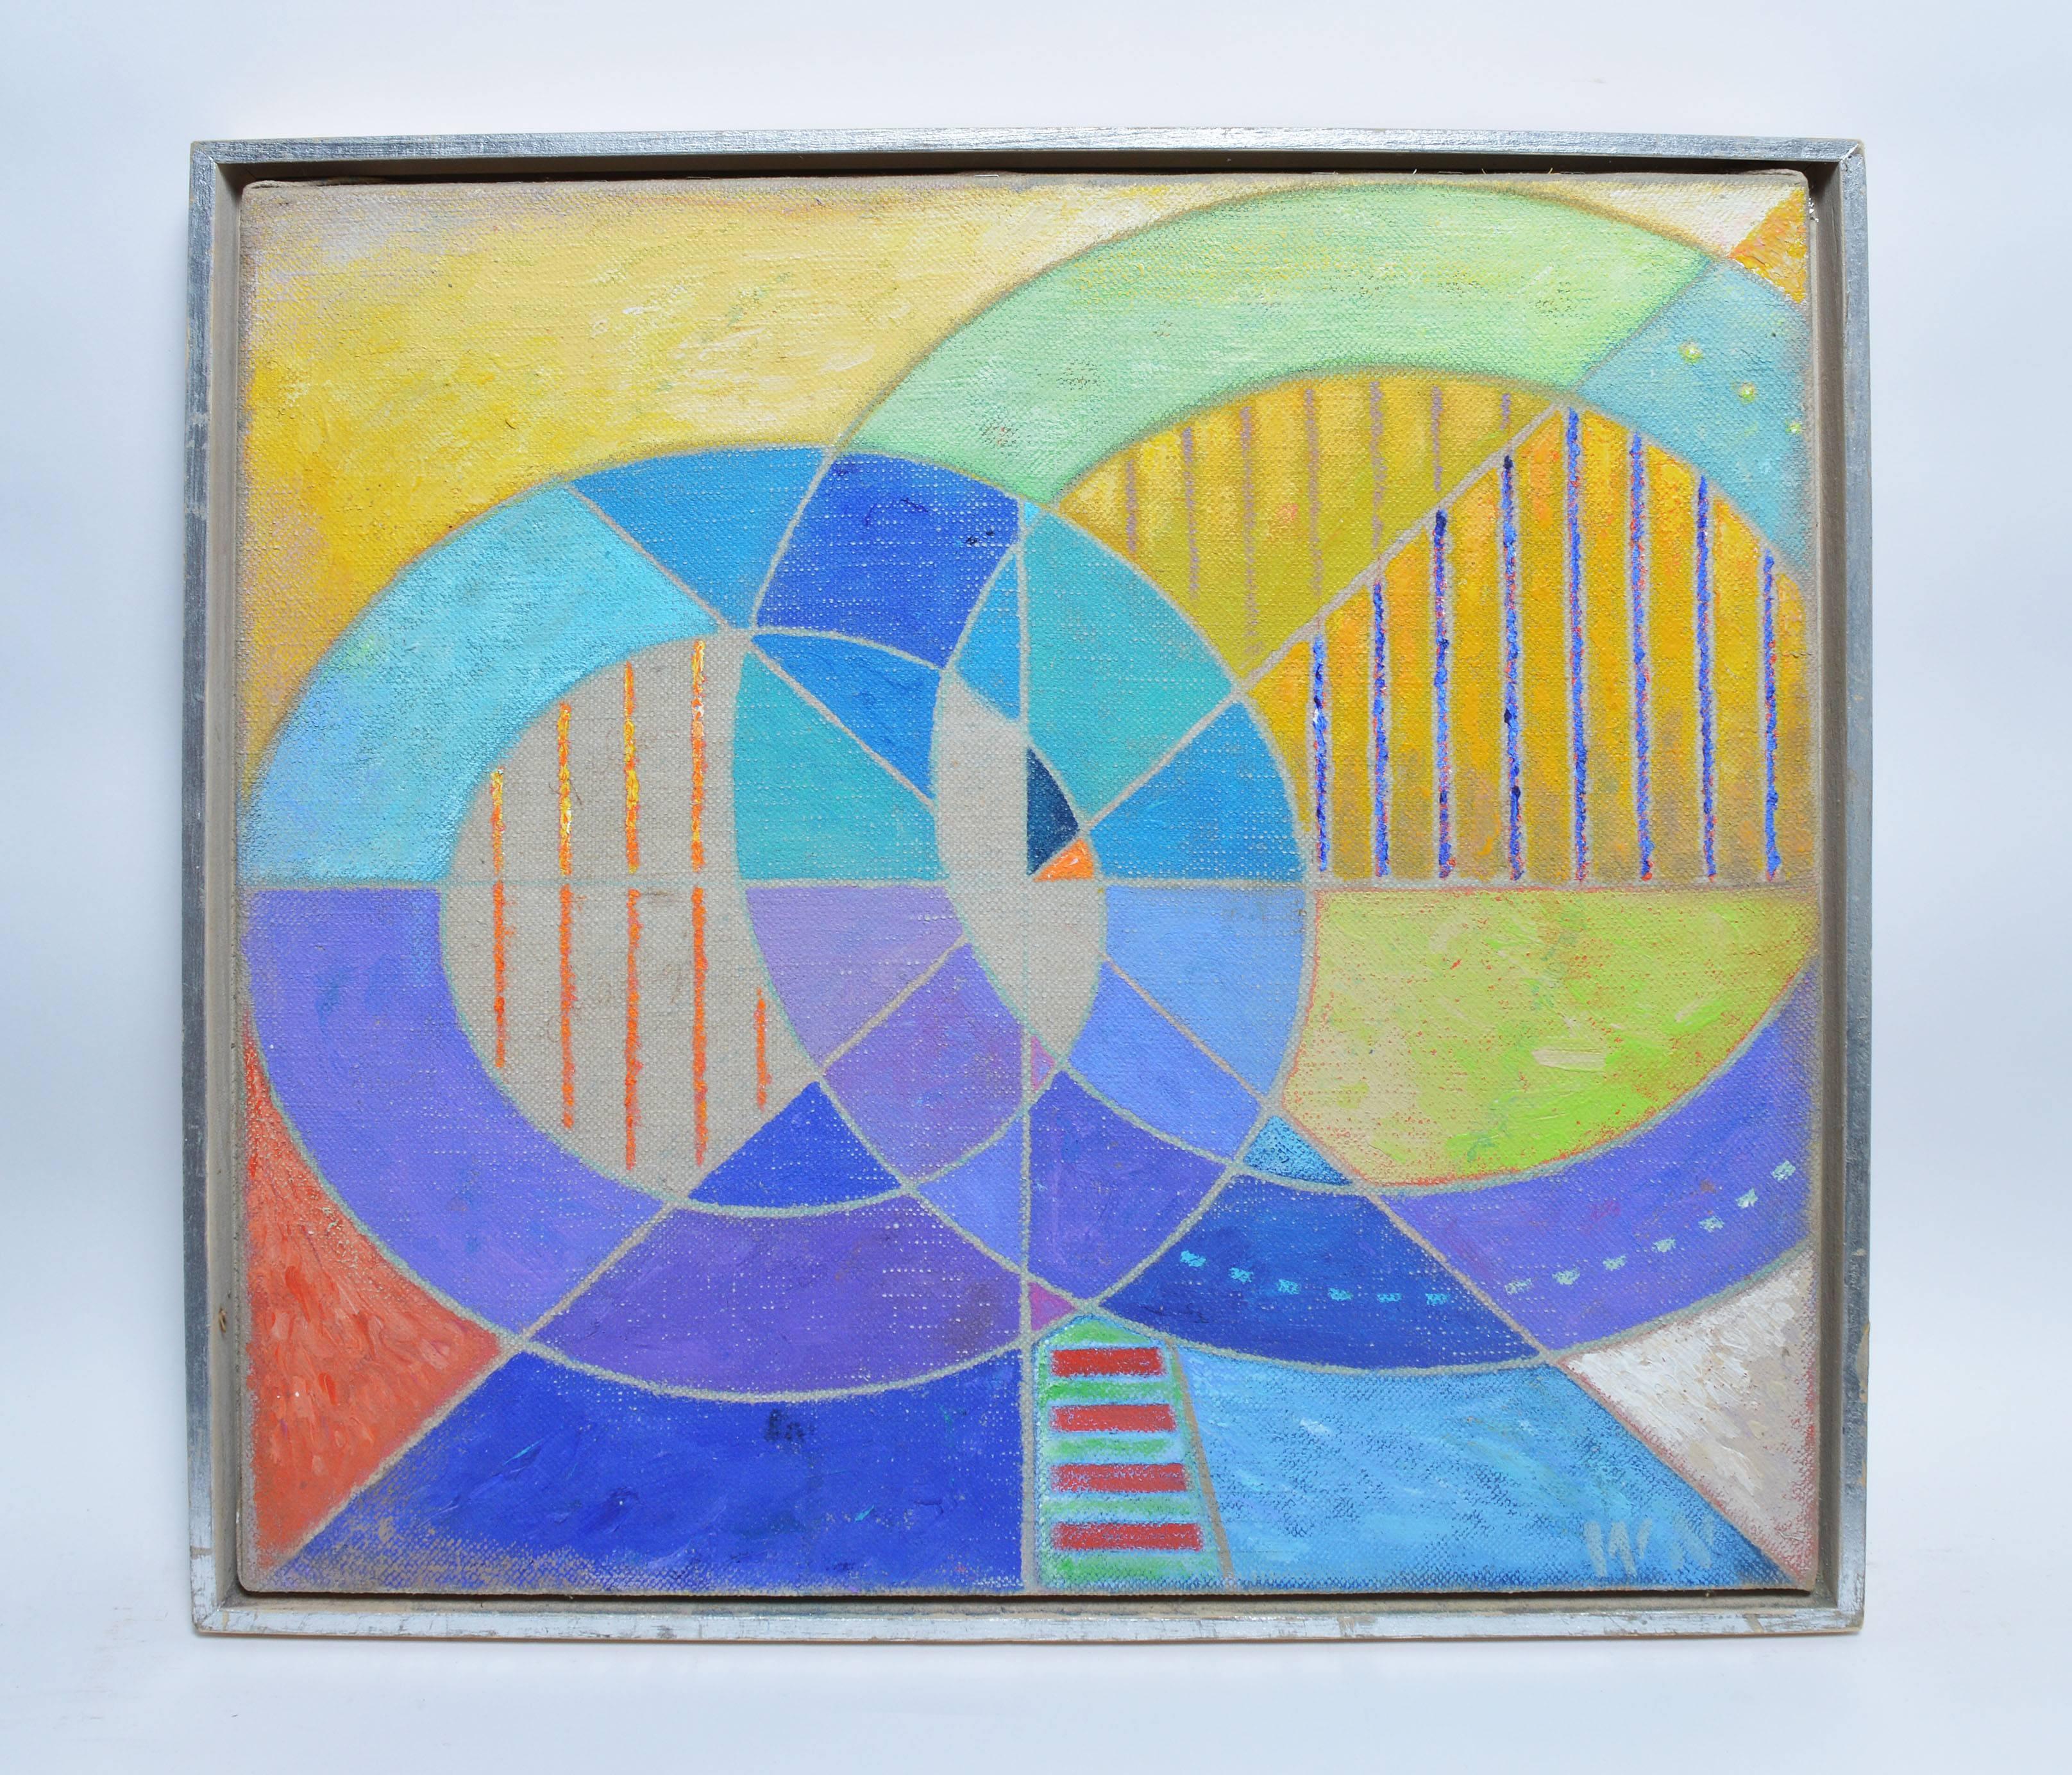 Modernist abstract painting of a Ferris Wheel by Walter Nowatka (b.1945). Oil on canvas, circa 1986. Signed lower right, 